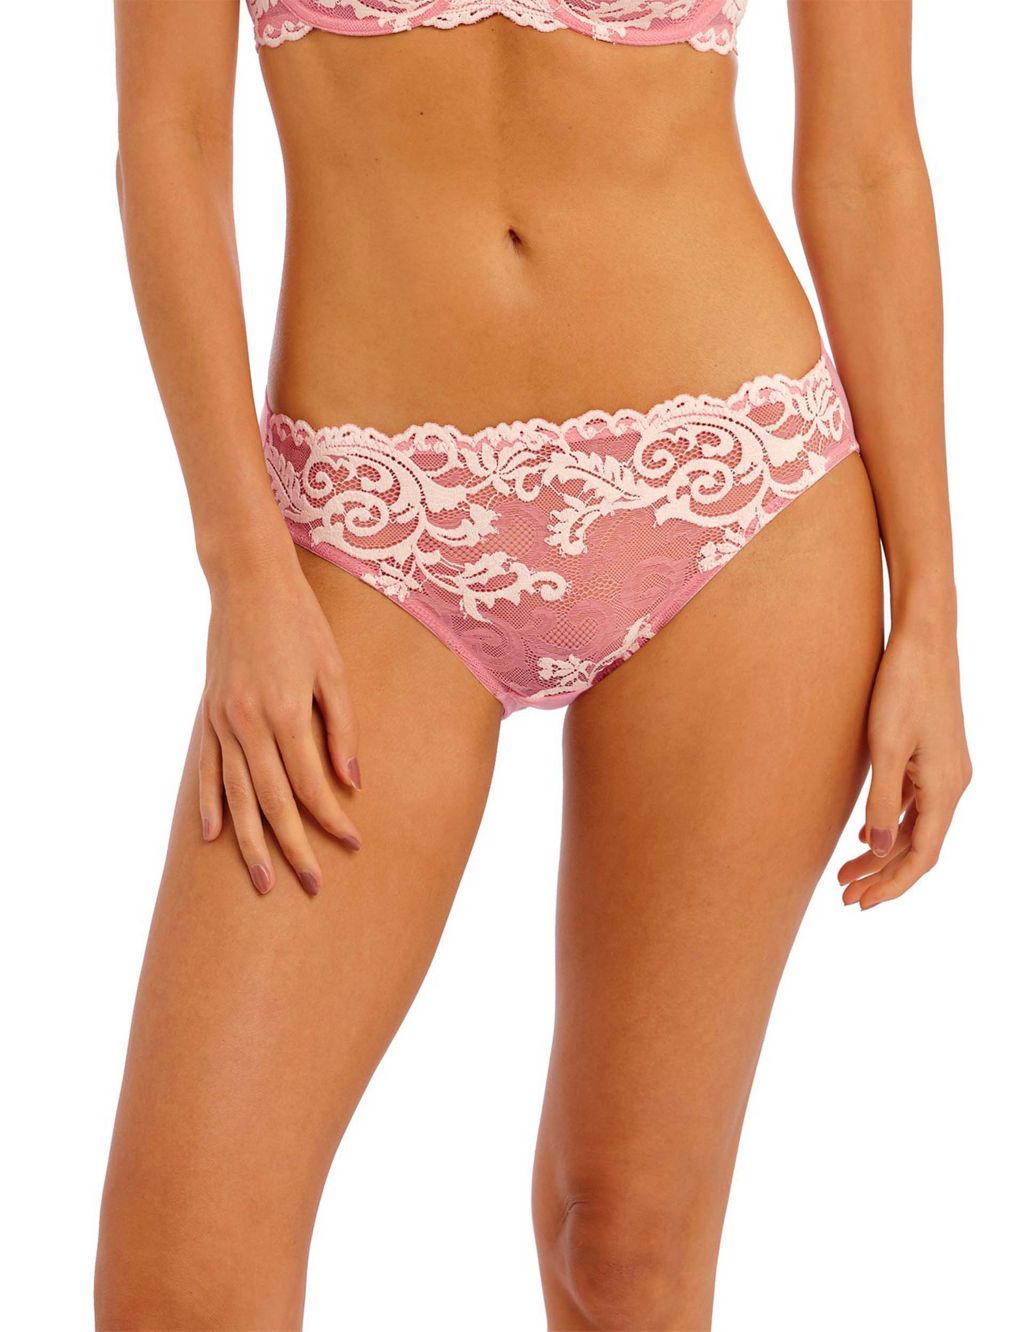 Instant Icon Floral Lace Bikini Knickers image 1